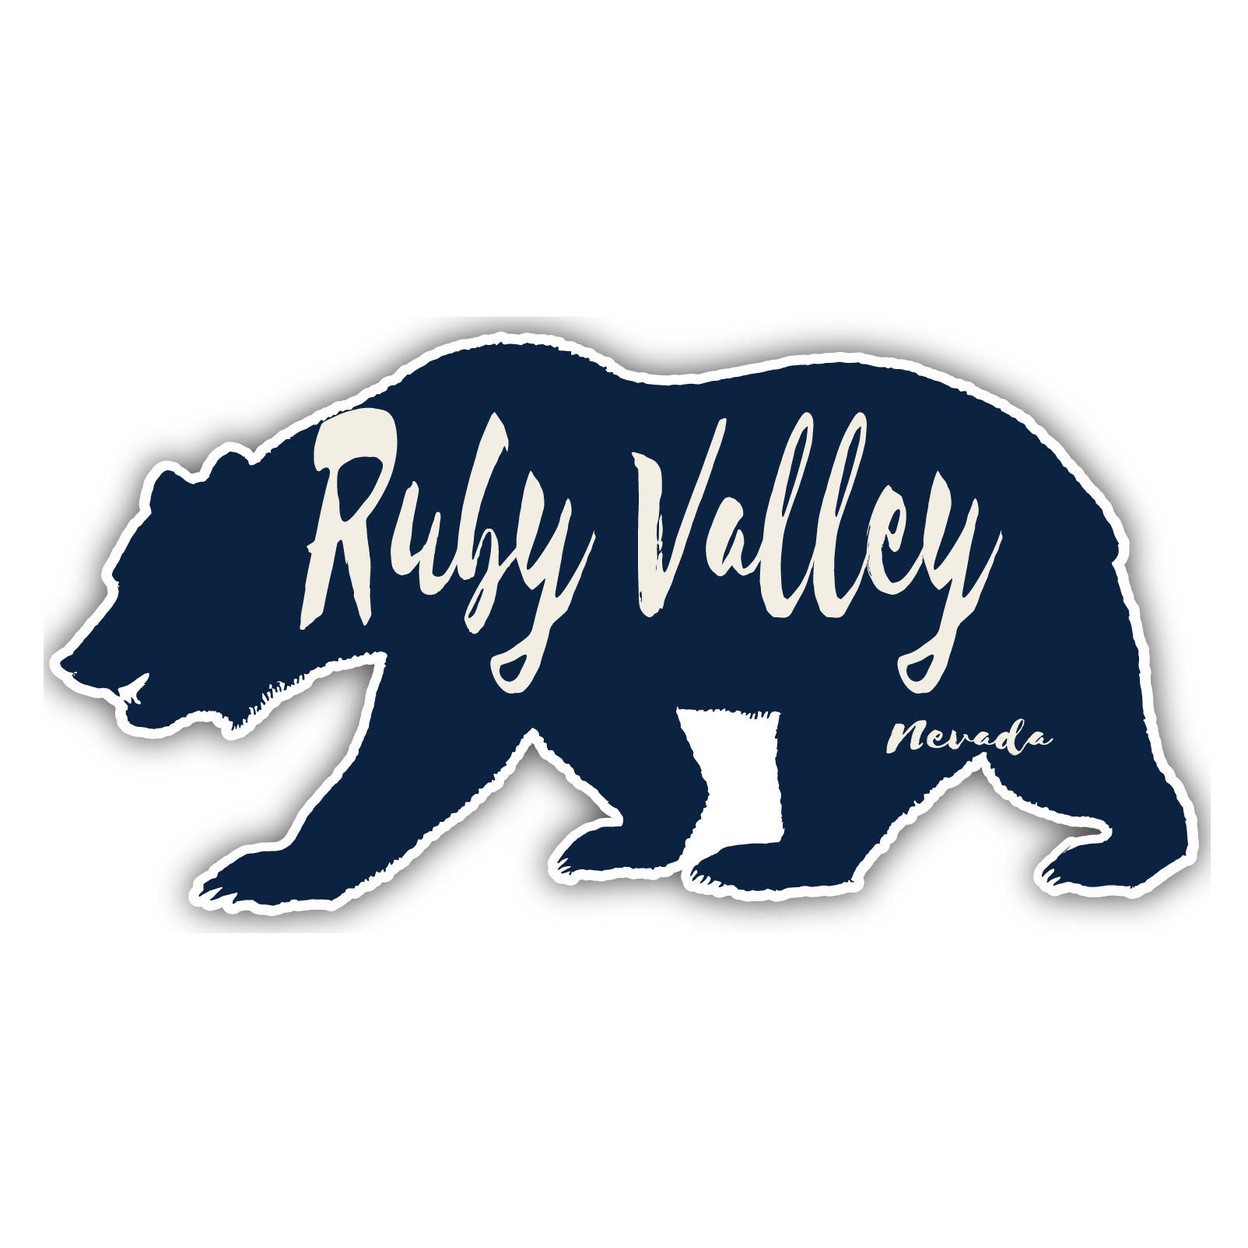 Ruby Valley Nevada Souvenir Decorative Stickers (Choose Theme And Size) - Single Unit, 4-Inch, Bear